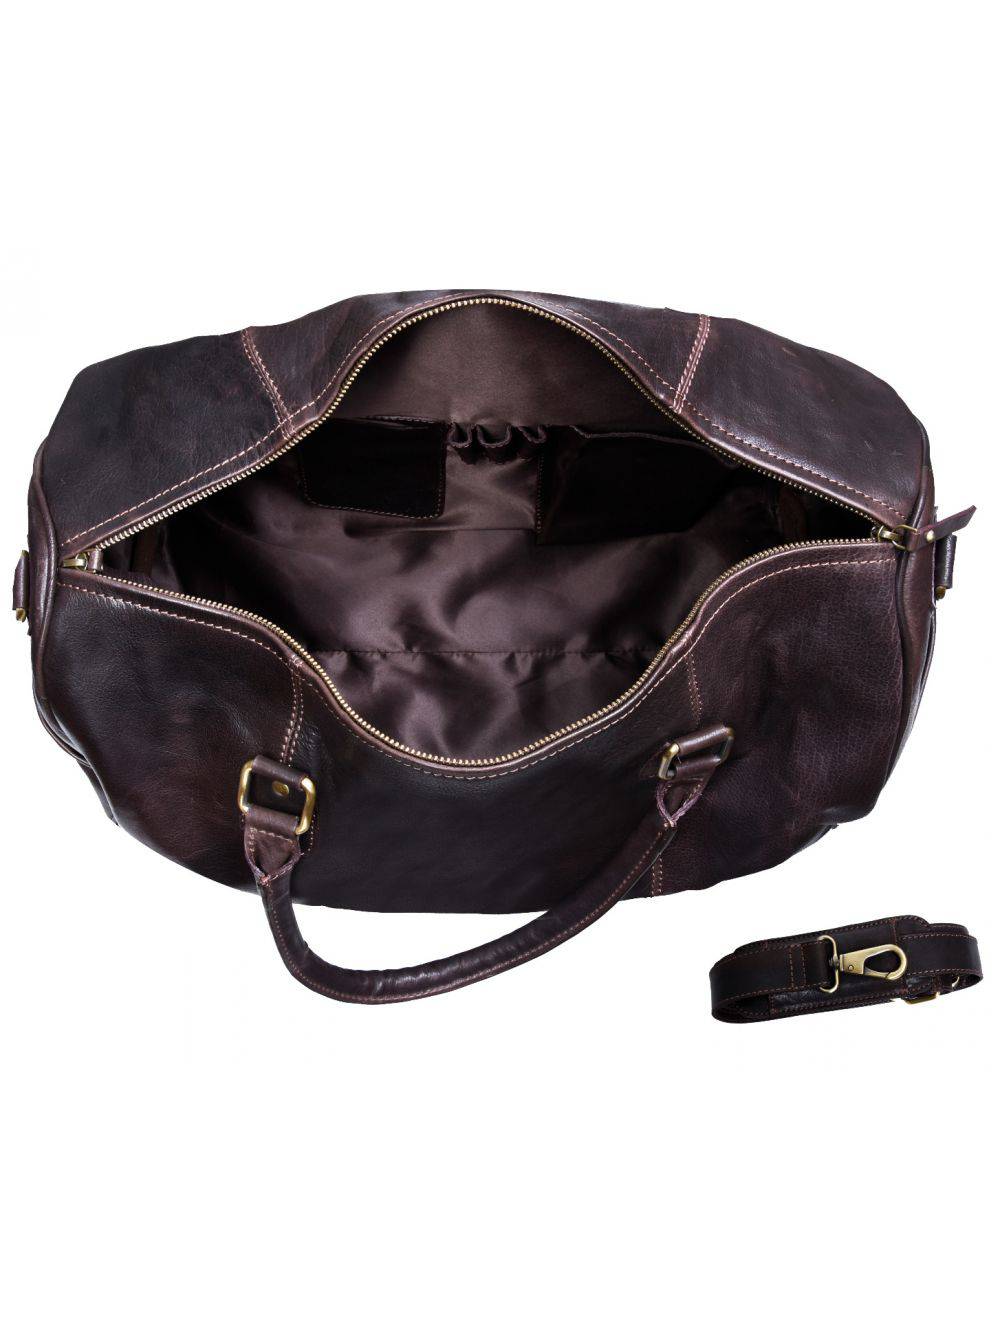 Brown Leather Duffle Travel Gym Weekend Carry On Bag for sale - Woodcock and Cavendish